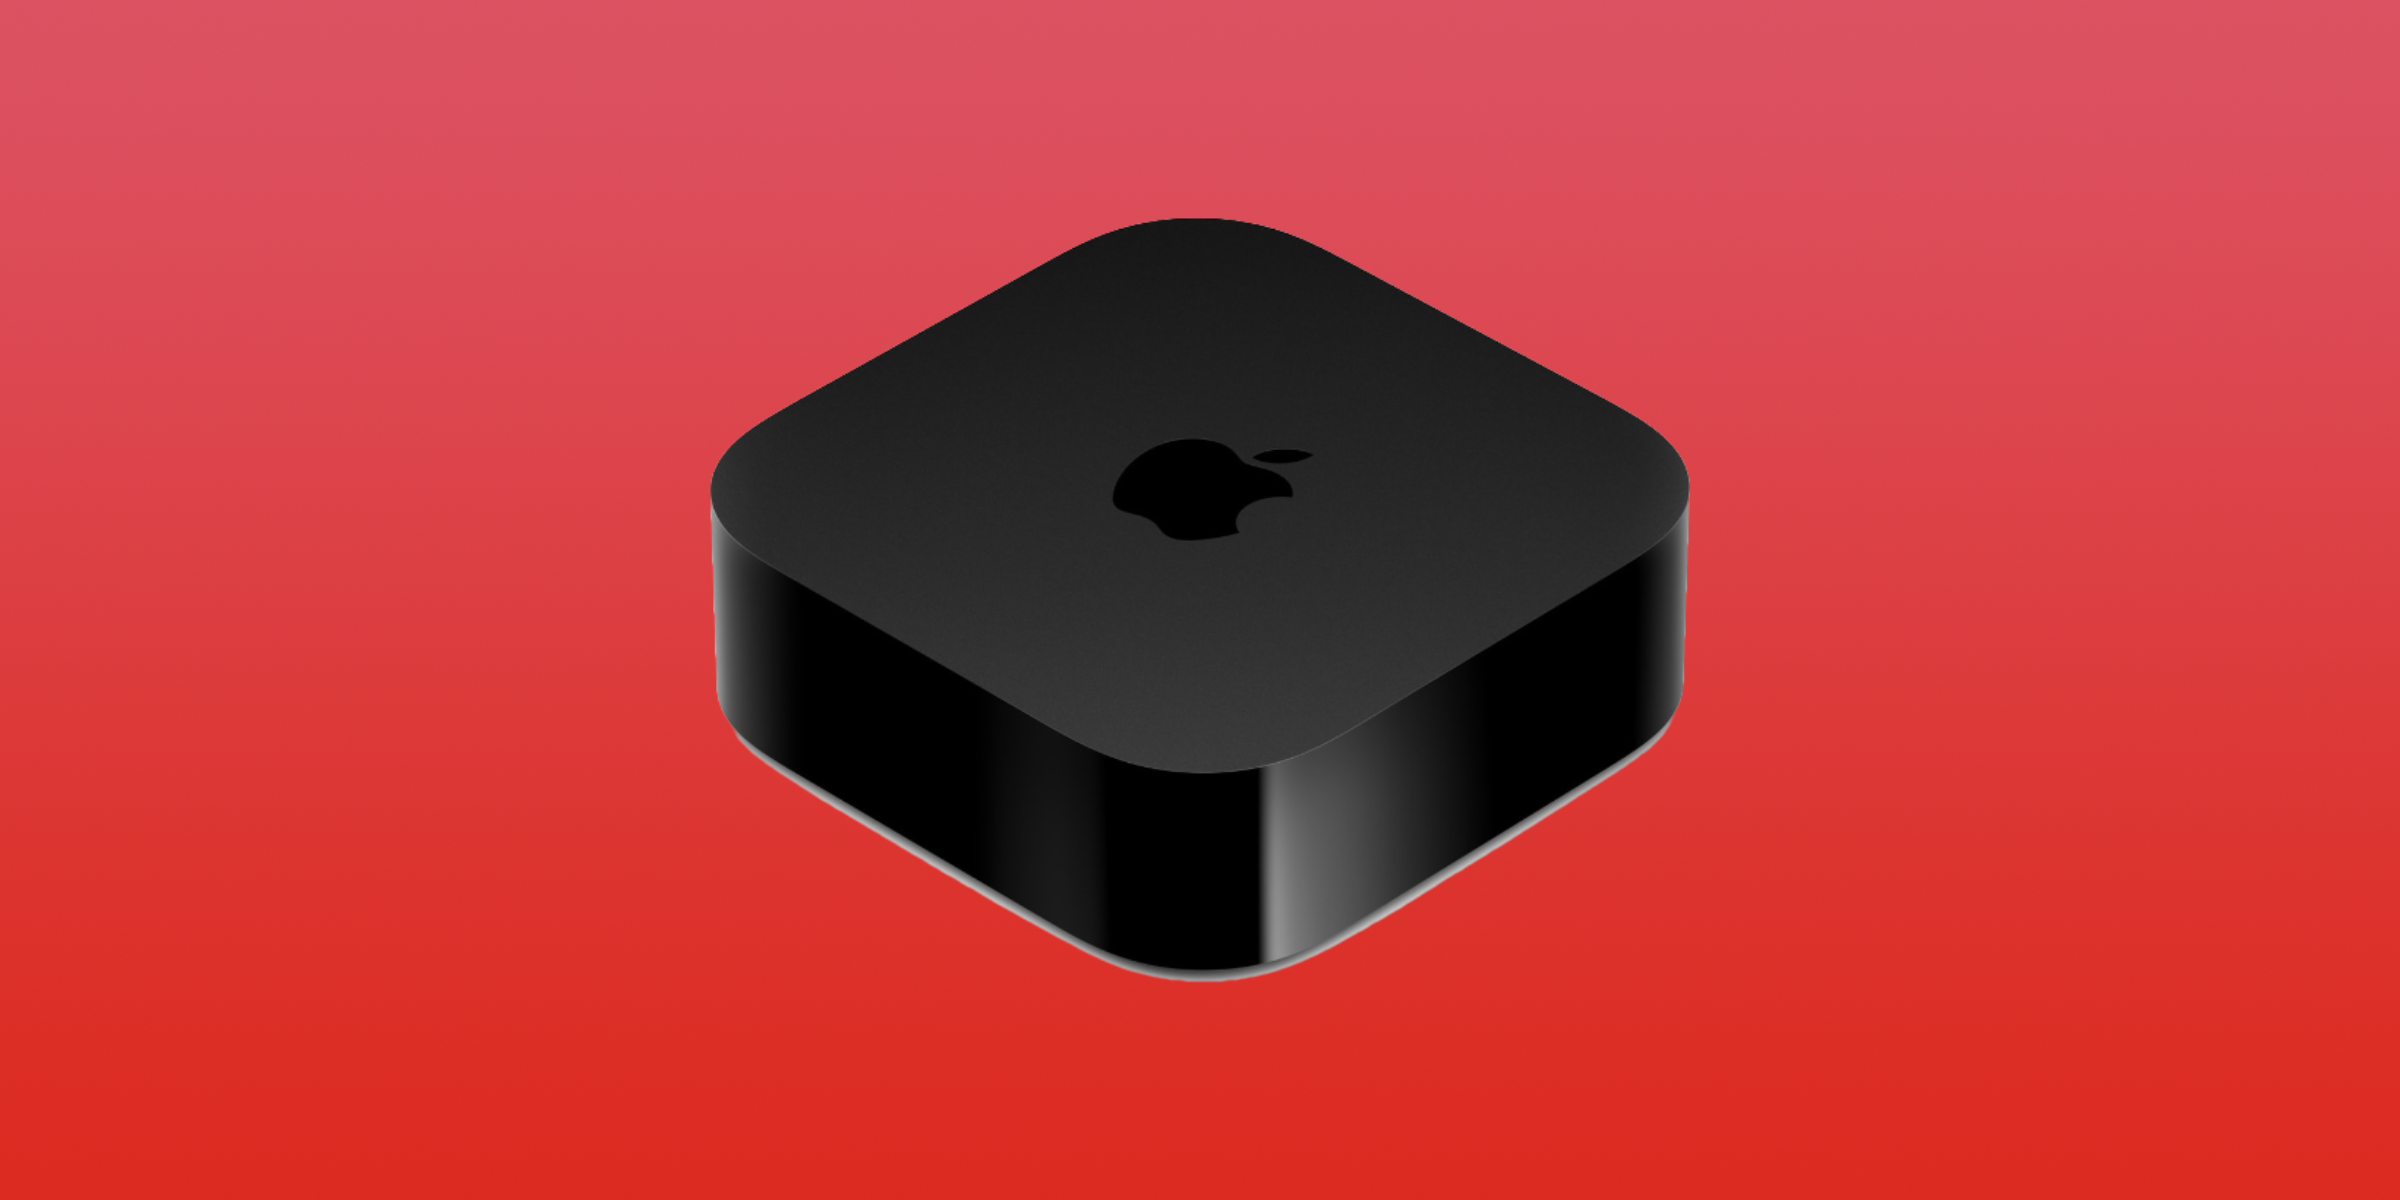 Apple TV 2022 on a red gradient background.